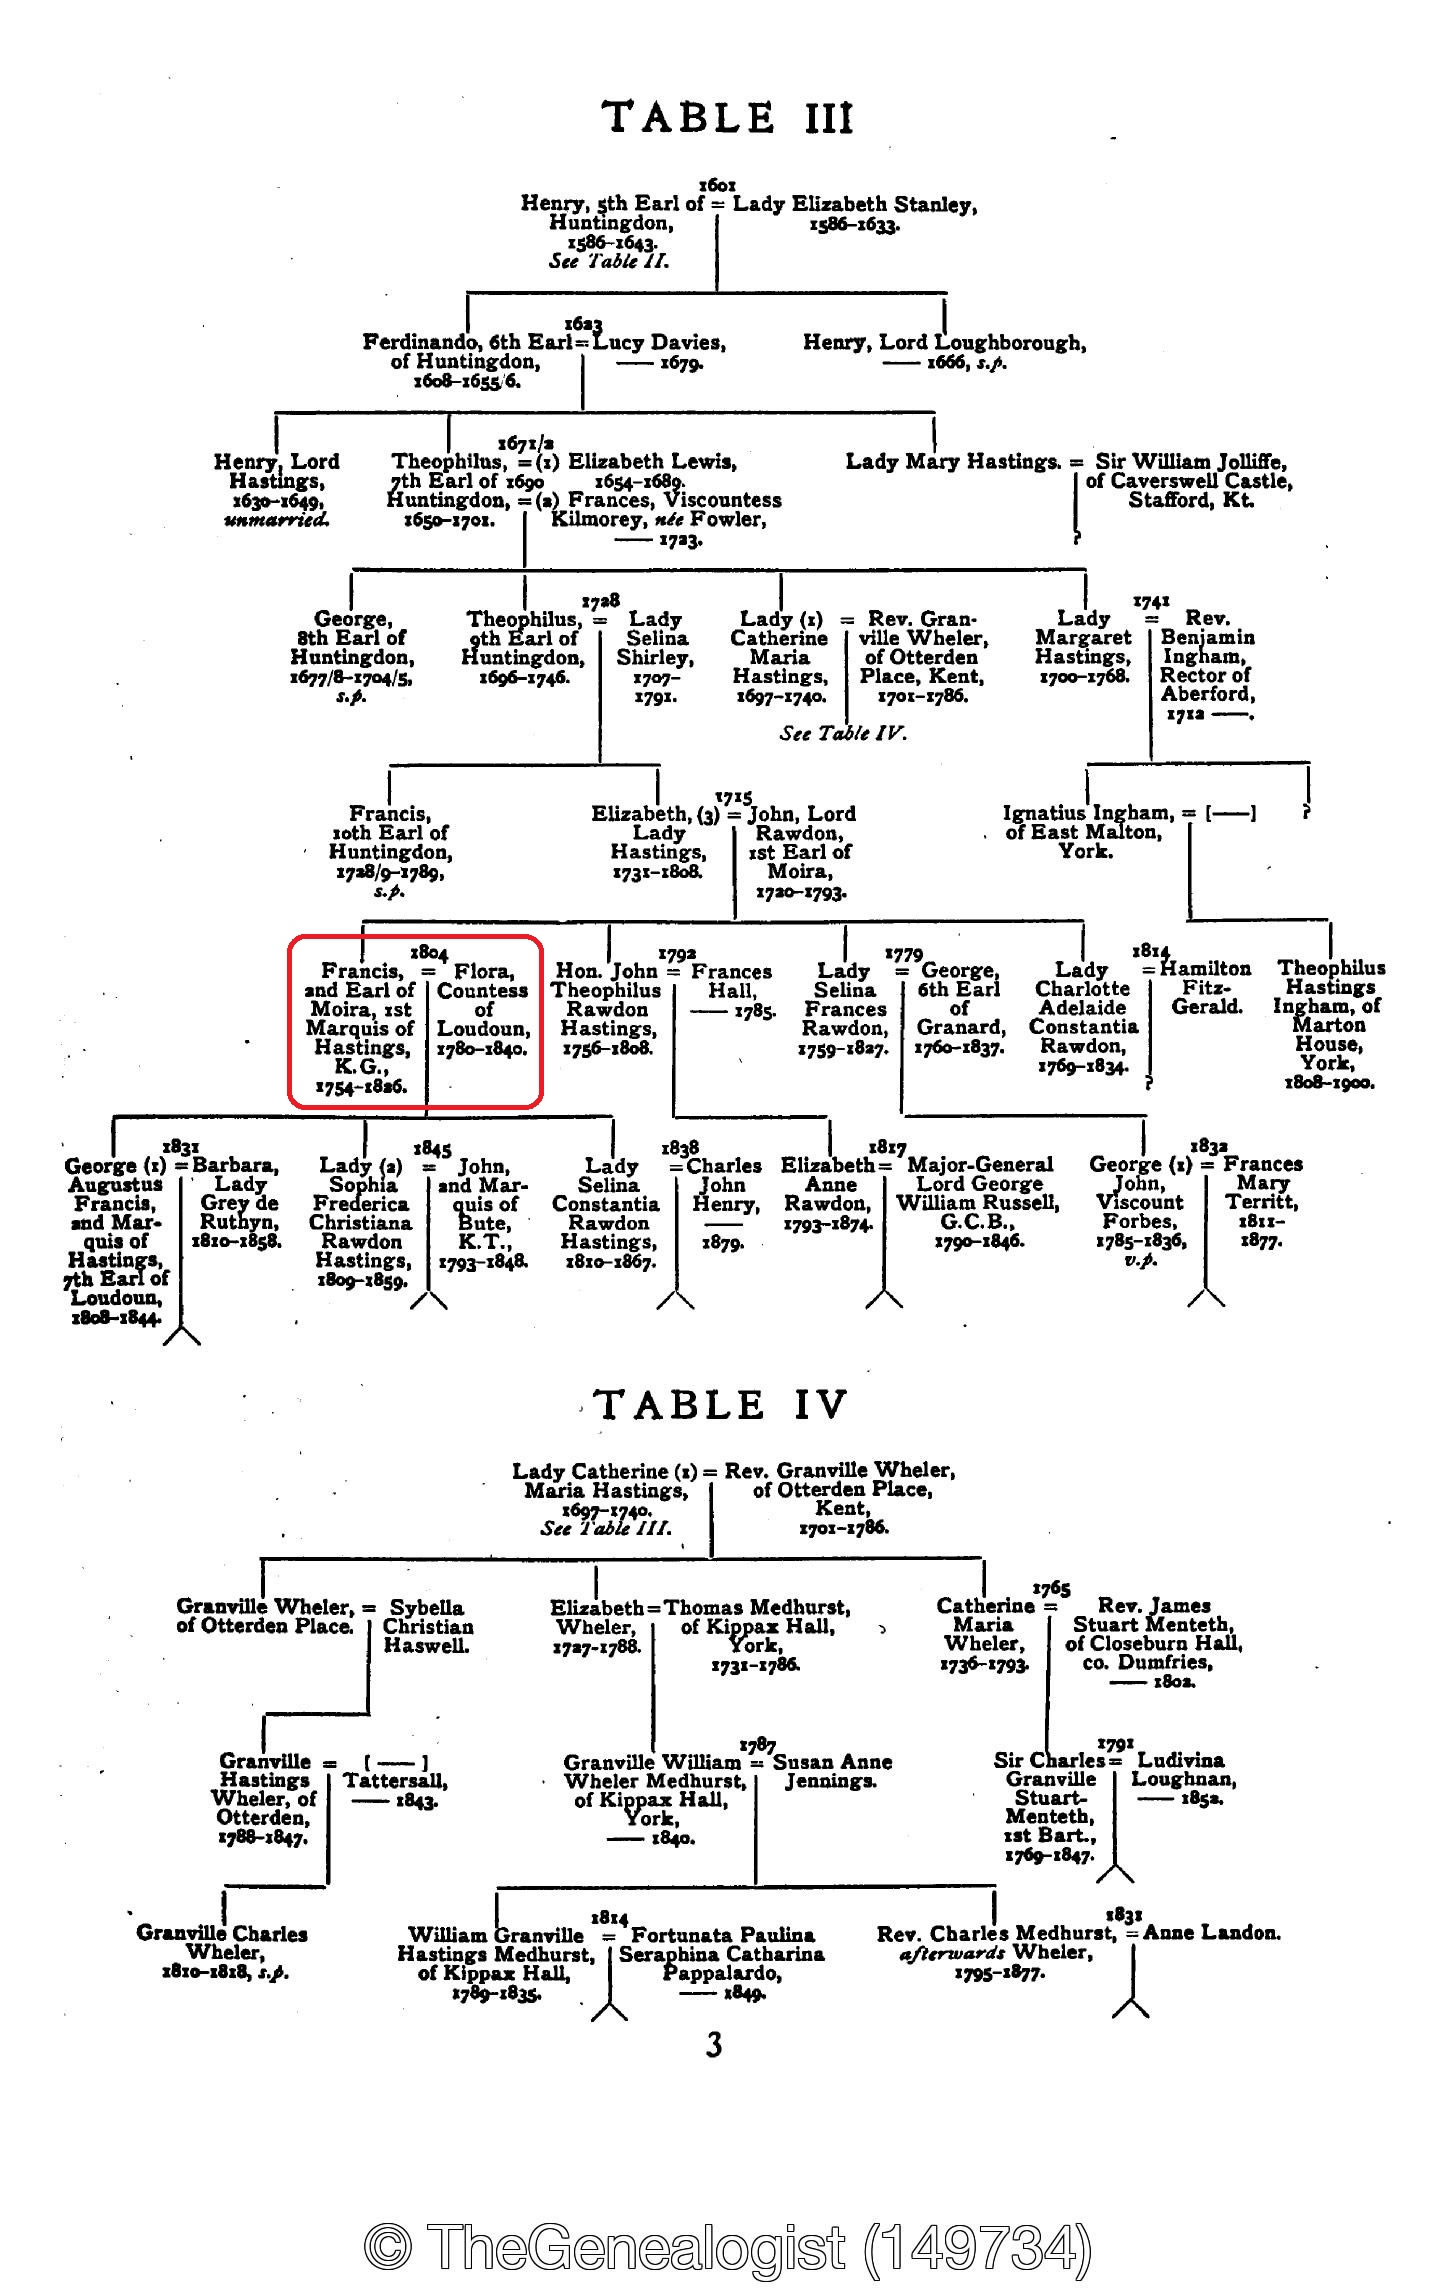 The Peerage, Baronetage Knightage of the British Empire 1880 reveals the connection to the Earldom of Loudoun